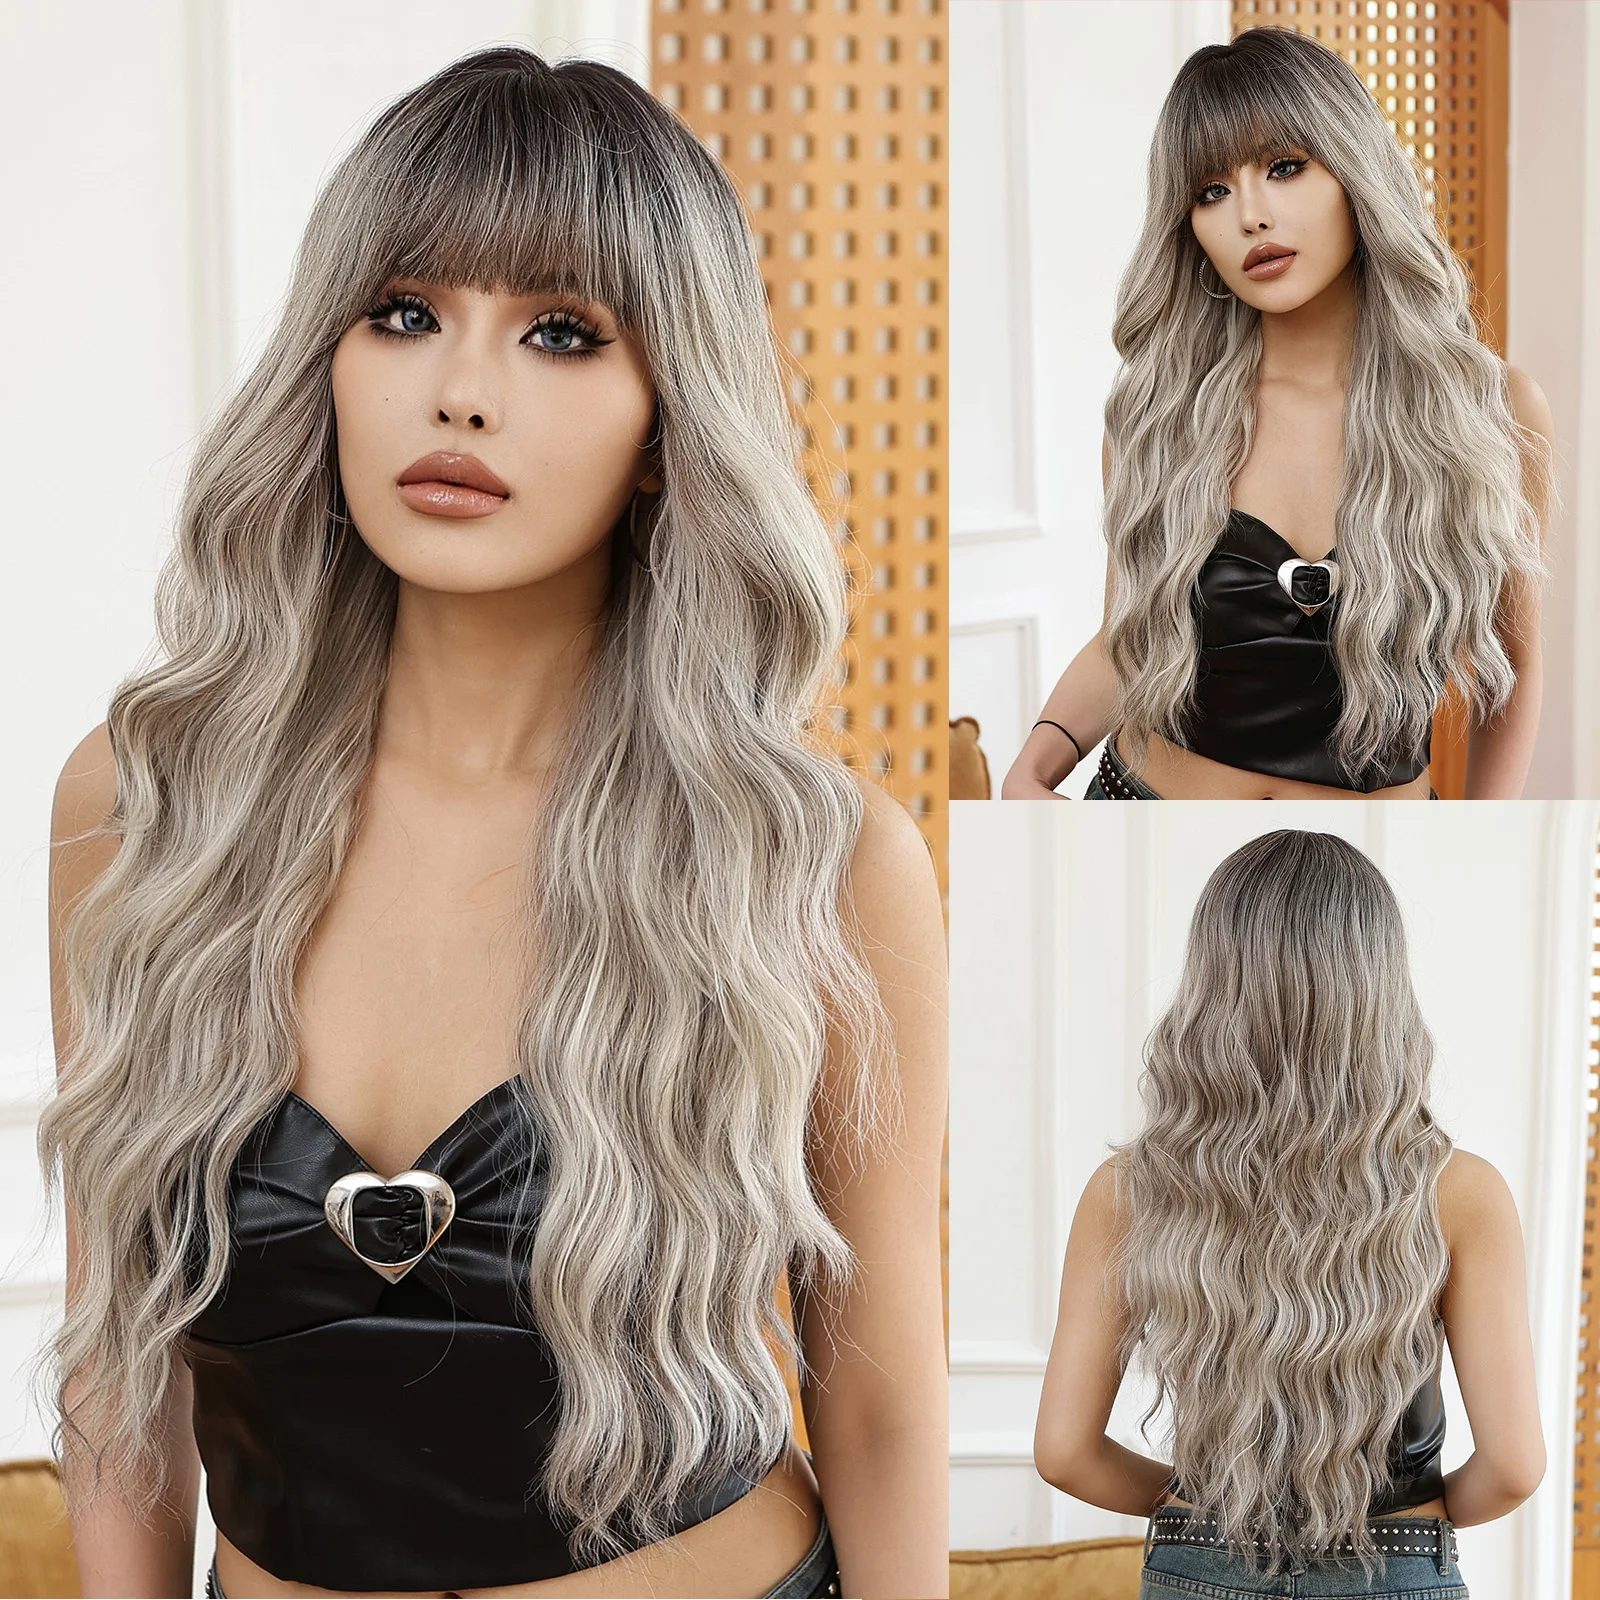 

HAIRCUBE Ombre Black Ash Blonde Synthetic Wigs for Women Long Curly Wavy Wig with Bangs Heat Resistant Cosplay Natural Fake Hair